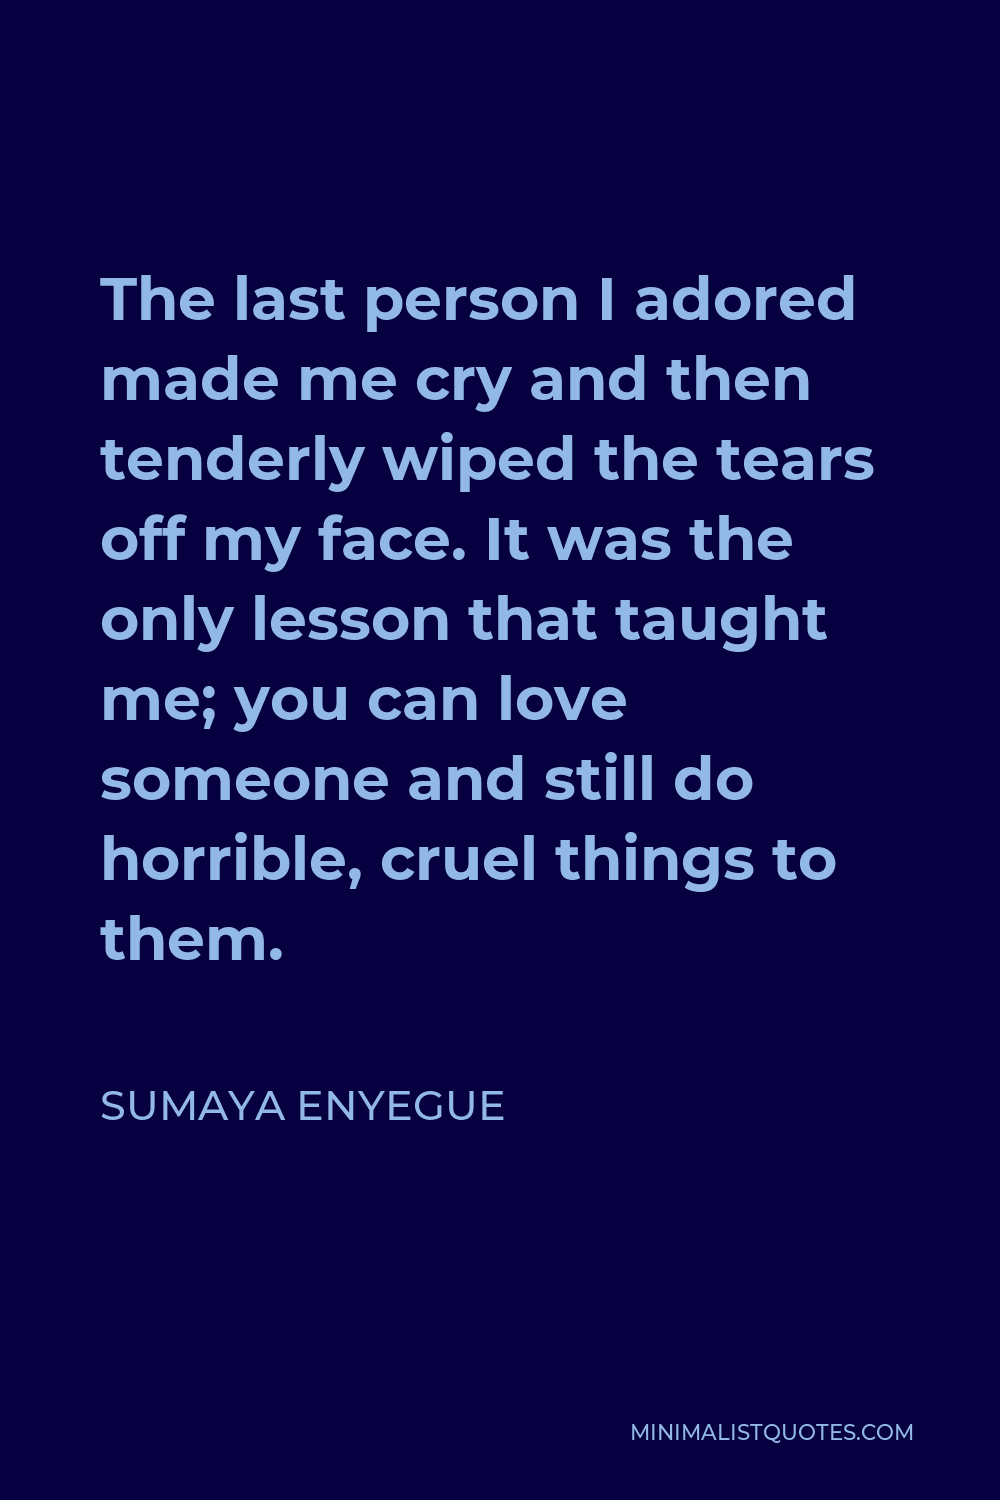 Sumaya Enyegue Quote - The last person I adored made me cry and then tenderly wiped the tears off my face. It was the only lesson that taught me; you can love someone and still do horrible, cruel things to them.